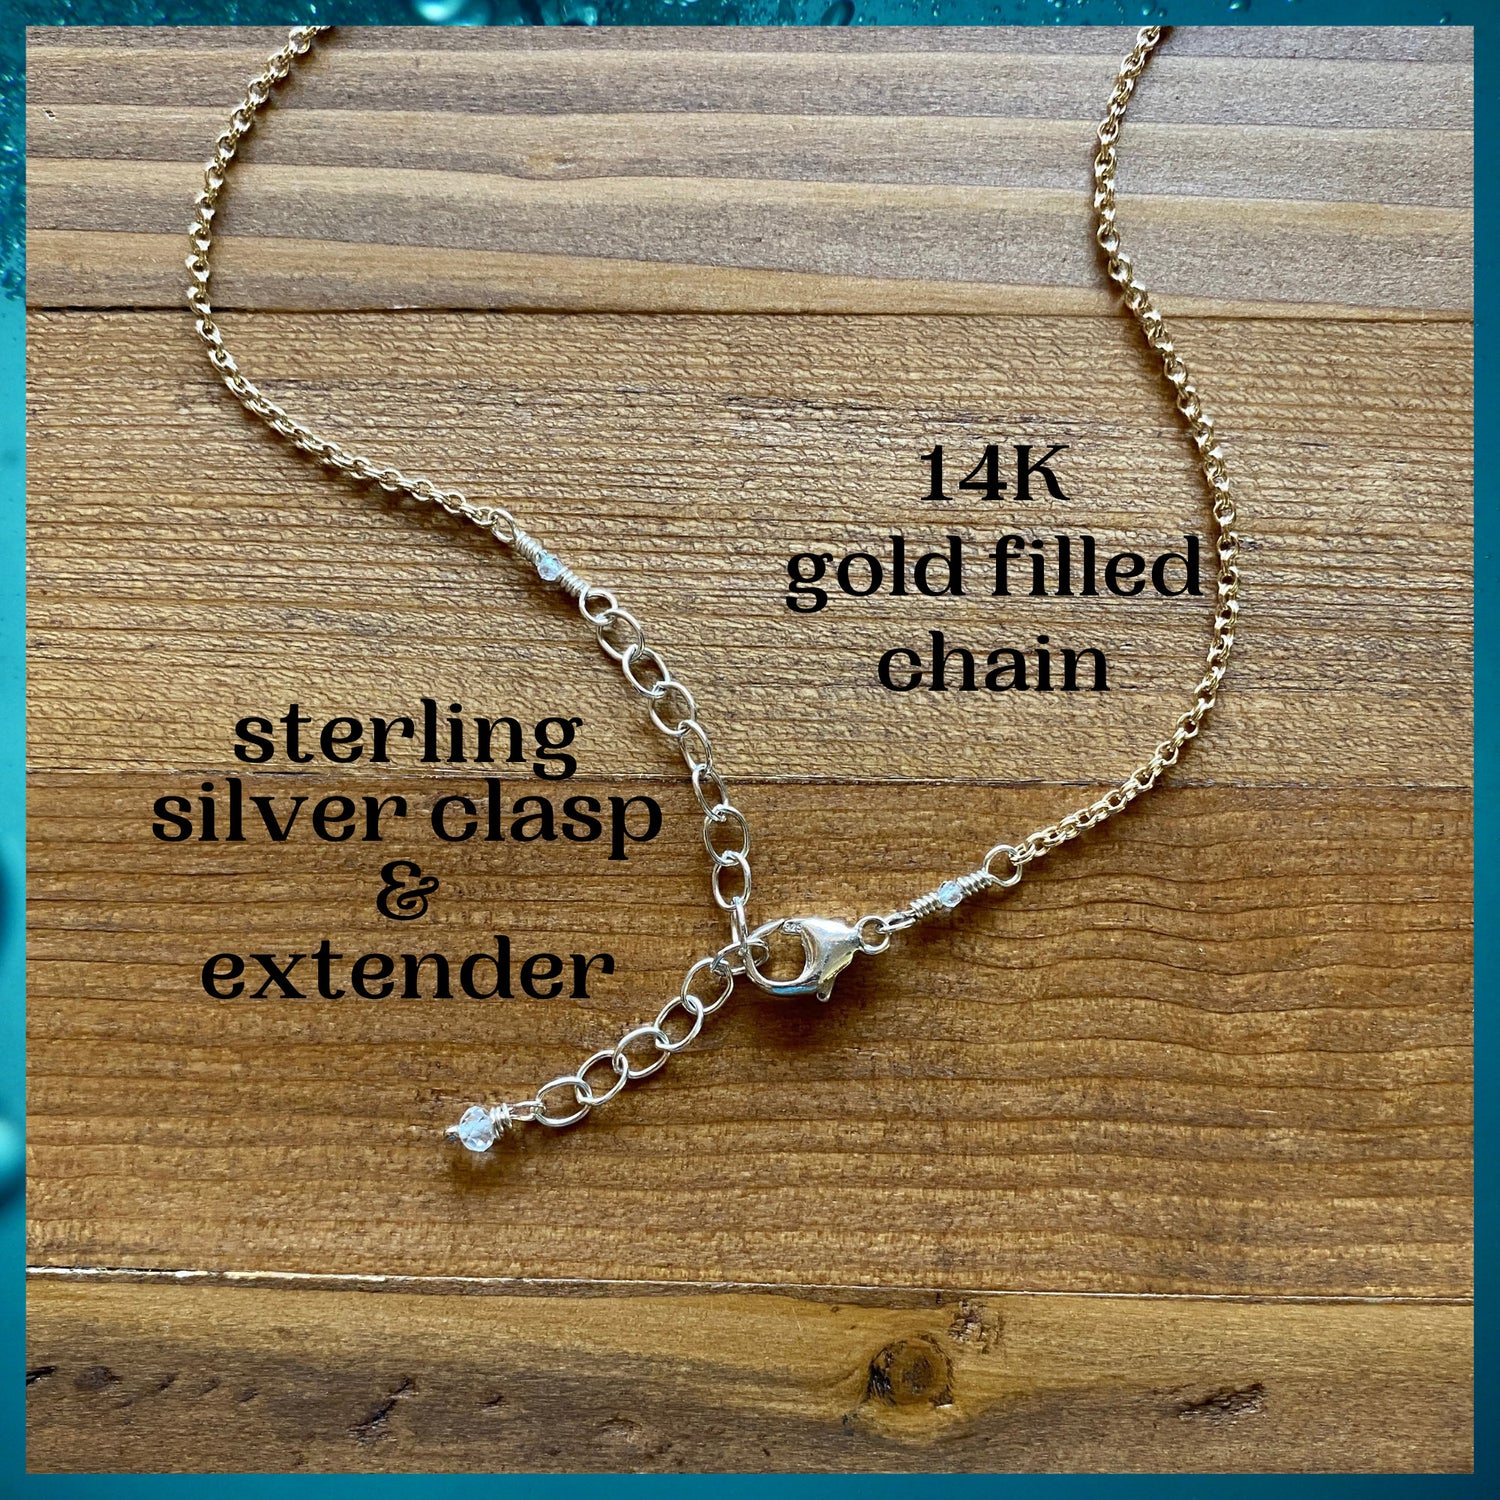 20th Mixed Metal Mid Size Milestone Birthday Necklace, Handcrafted Perfectly Imperfect Sterling Silver Sparkly Circles Pendant on Gold Chain